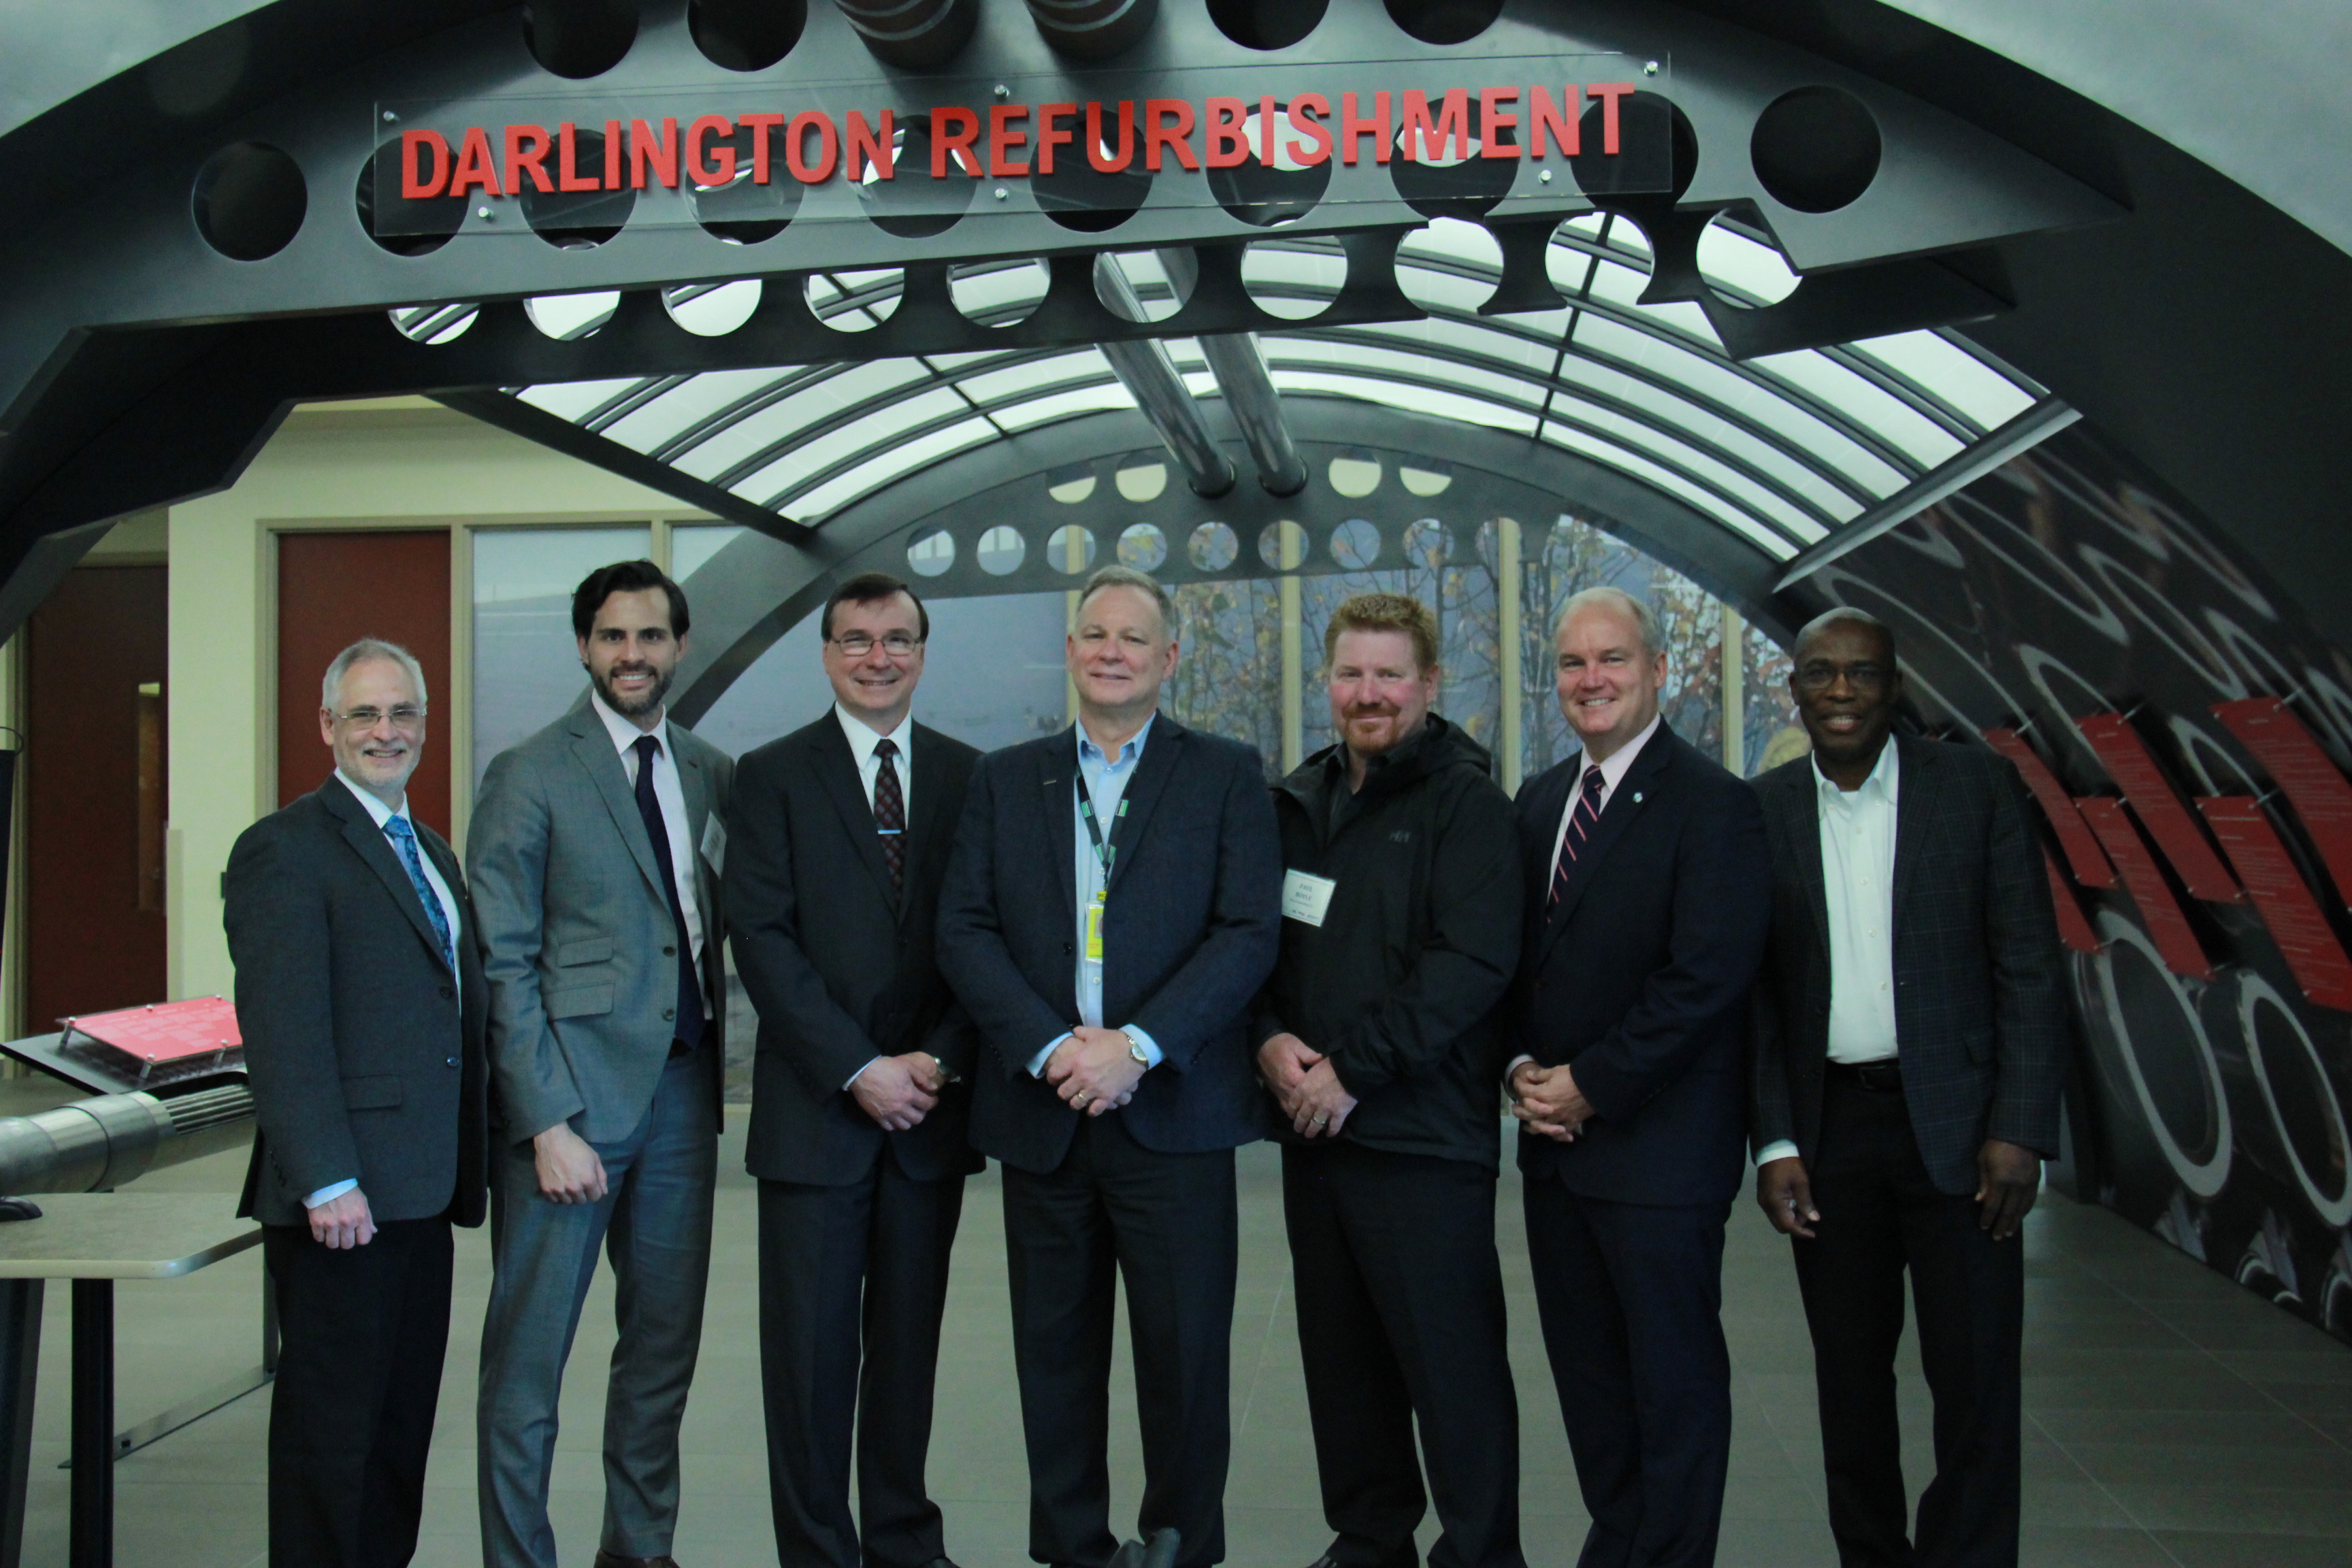 OCC Hosts Roundtables to Discuss the Economic Benefits of the Darlington Nuclear Refurbishment Project